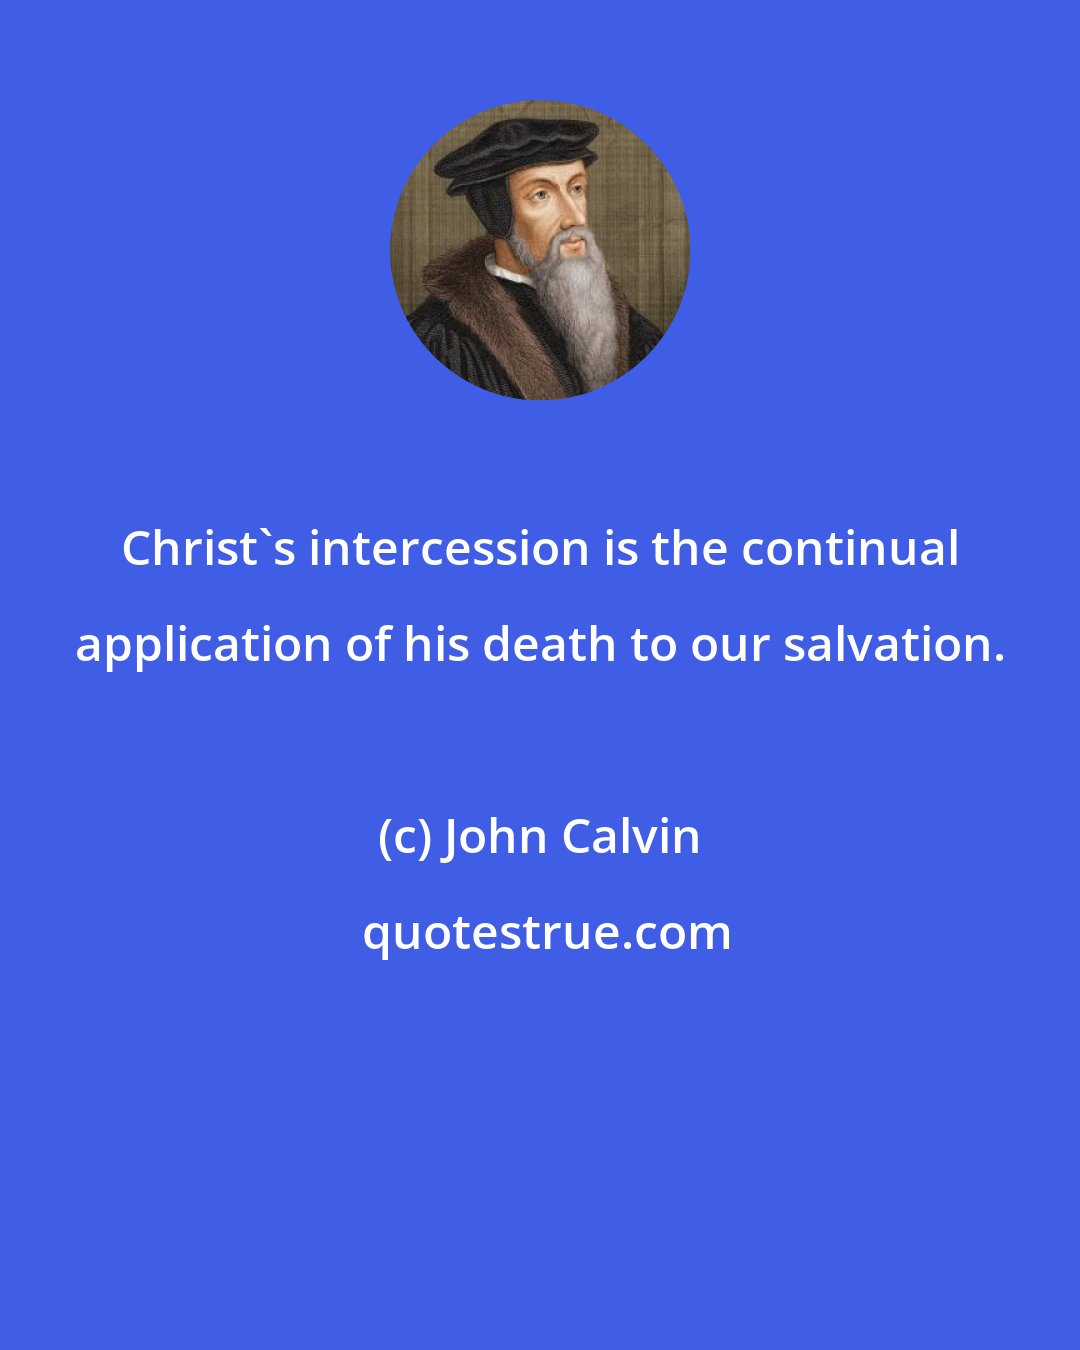 John Calvin: Christ's intercession is the continual application of his death to our salvation.